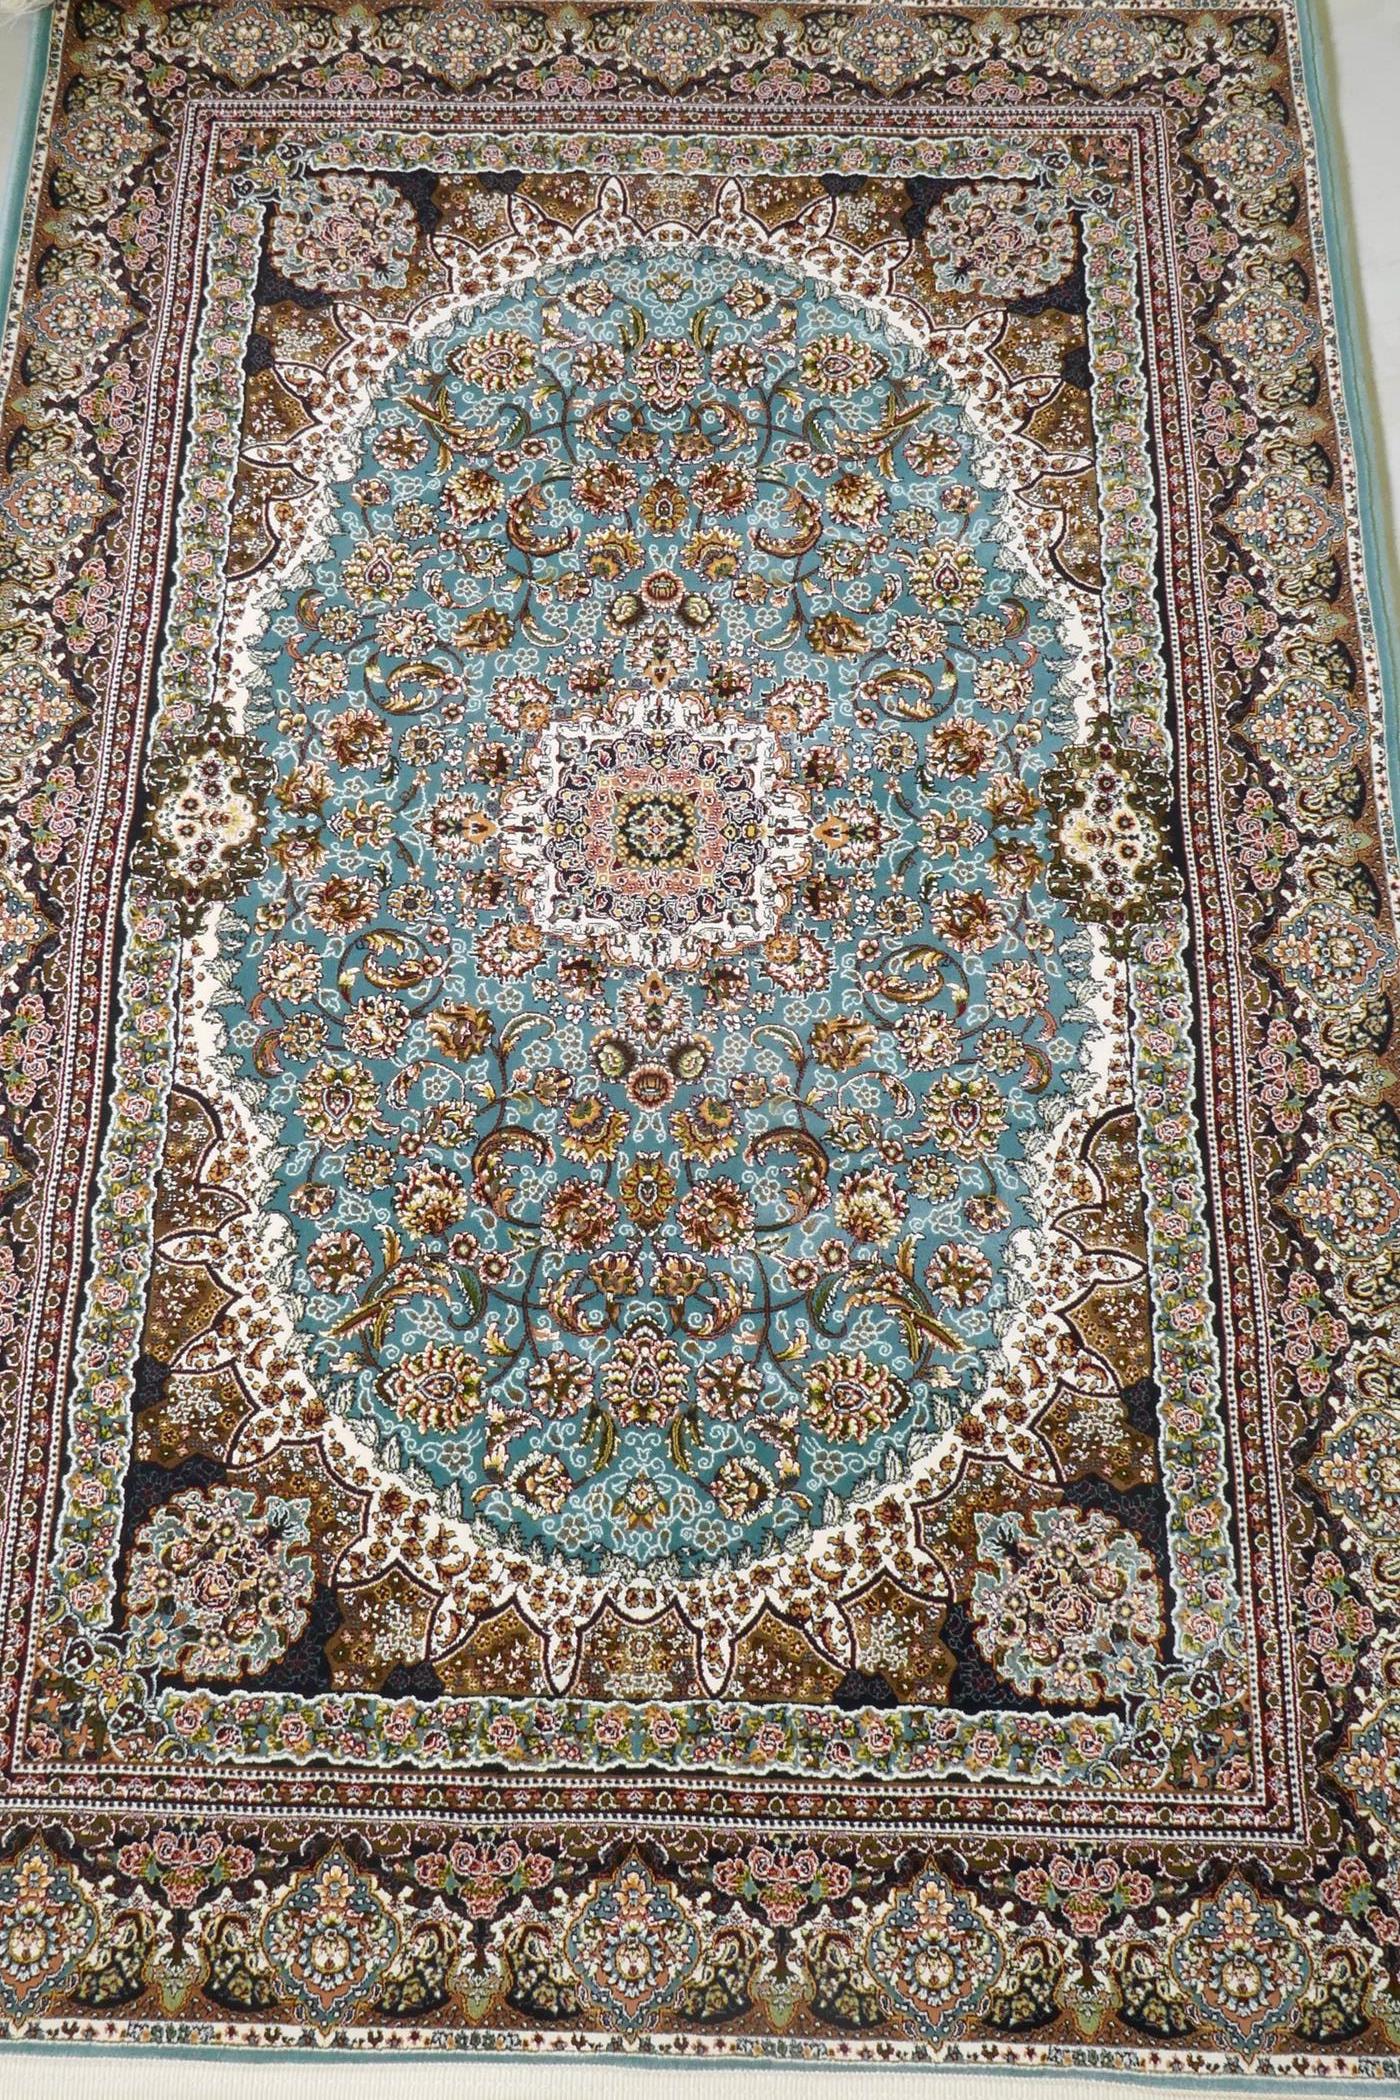 A fine woven full pile Iranian carpet with traditional floral medallion design on a turquoise field, - Image 2 of 5